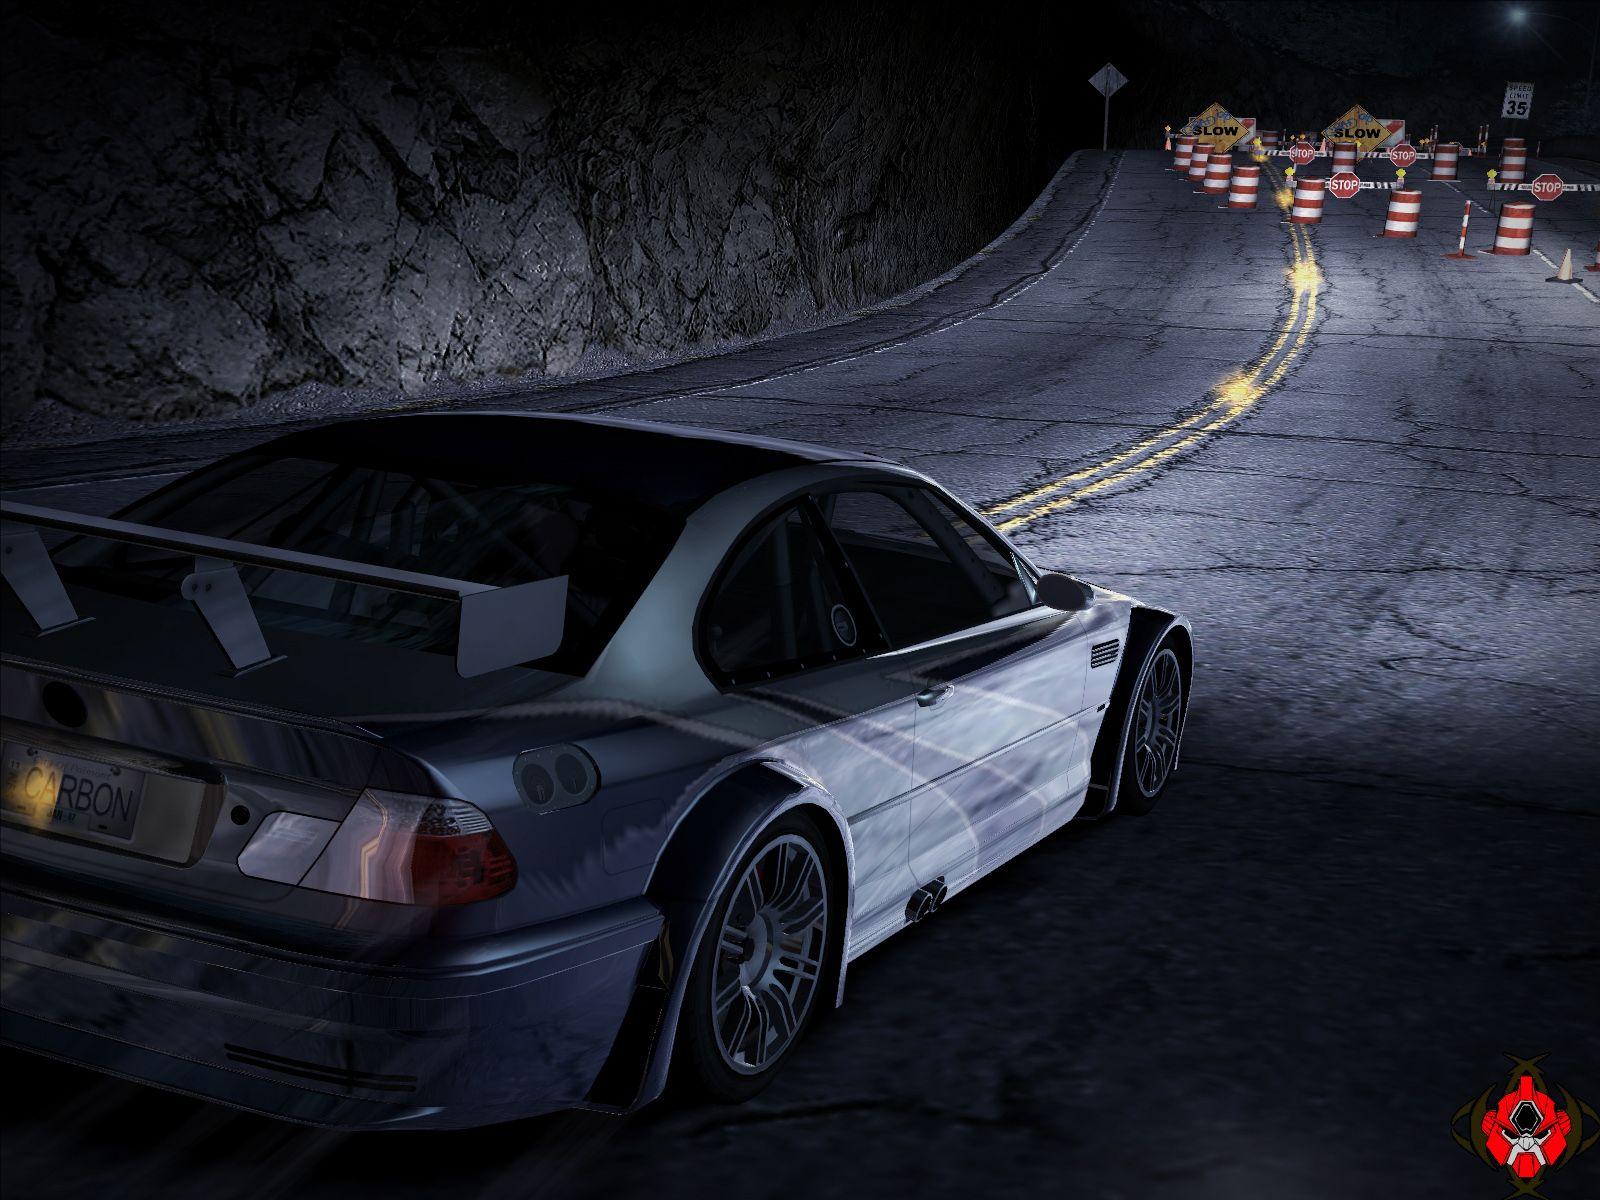 Need For Speed: Most Wanted Razor Wallpapers - Wallpaper Cave